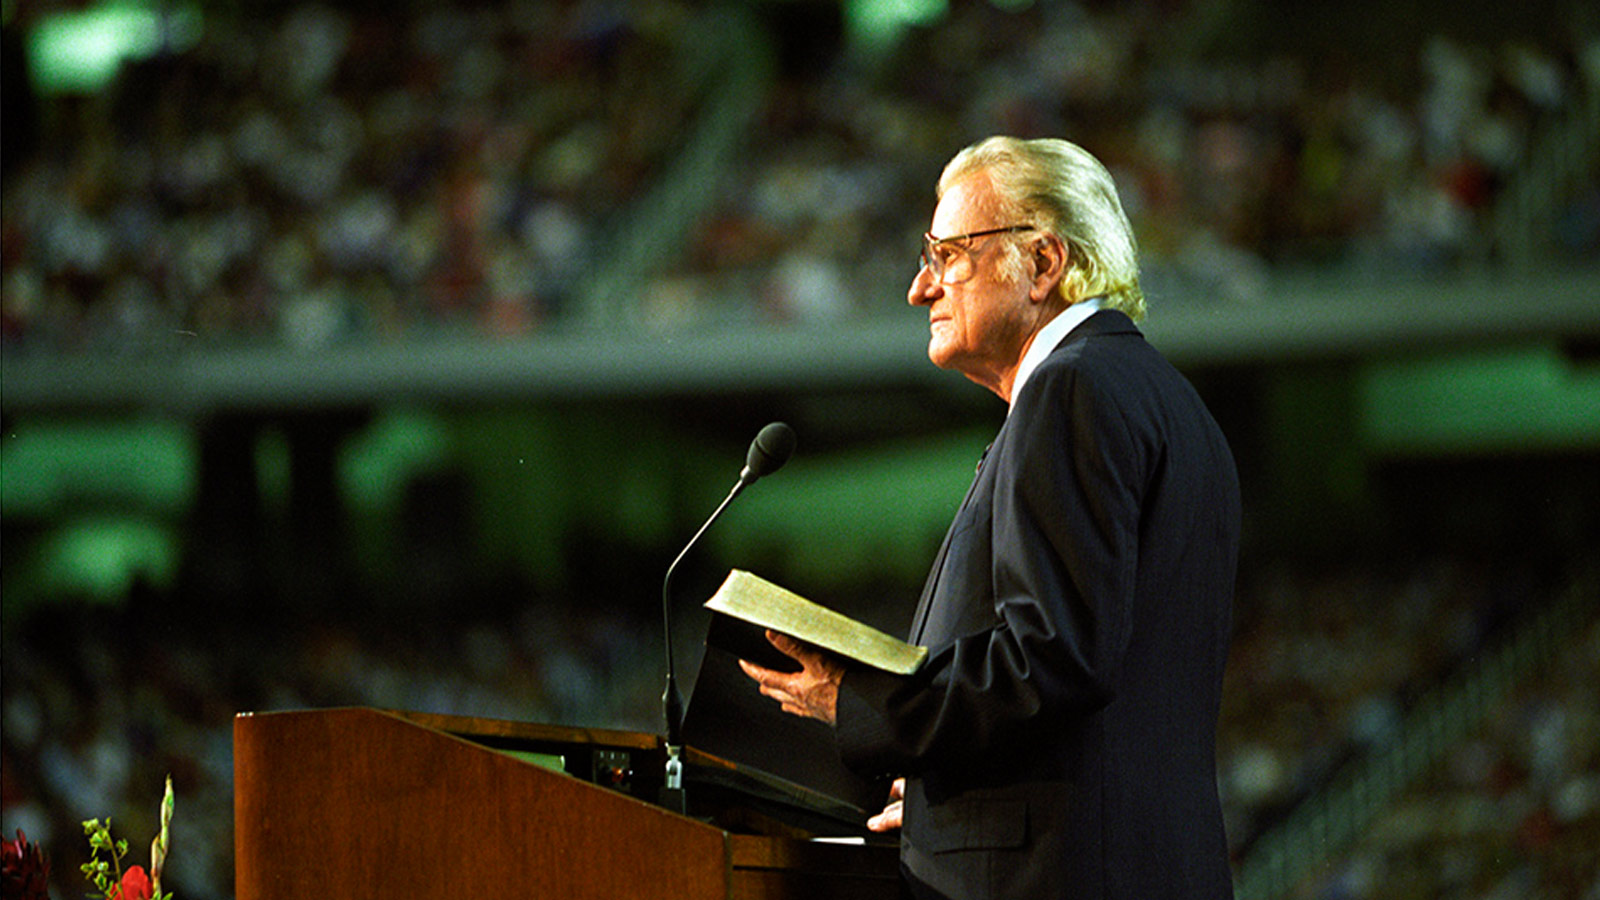 Billy Graham standing at a podium in a stadium